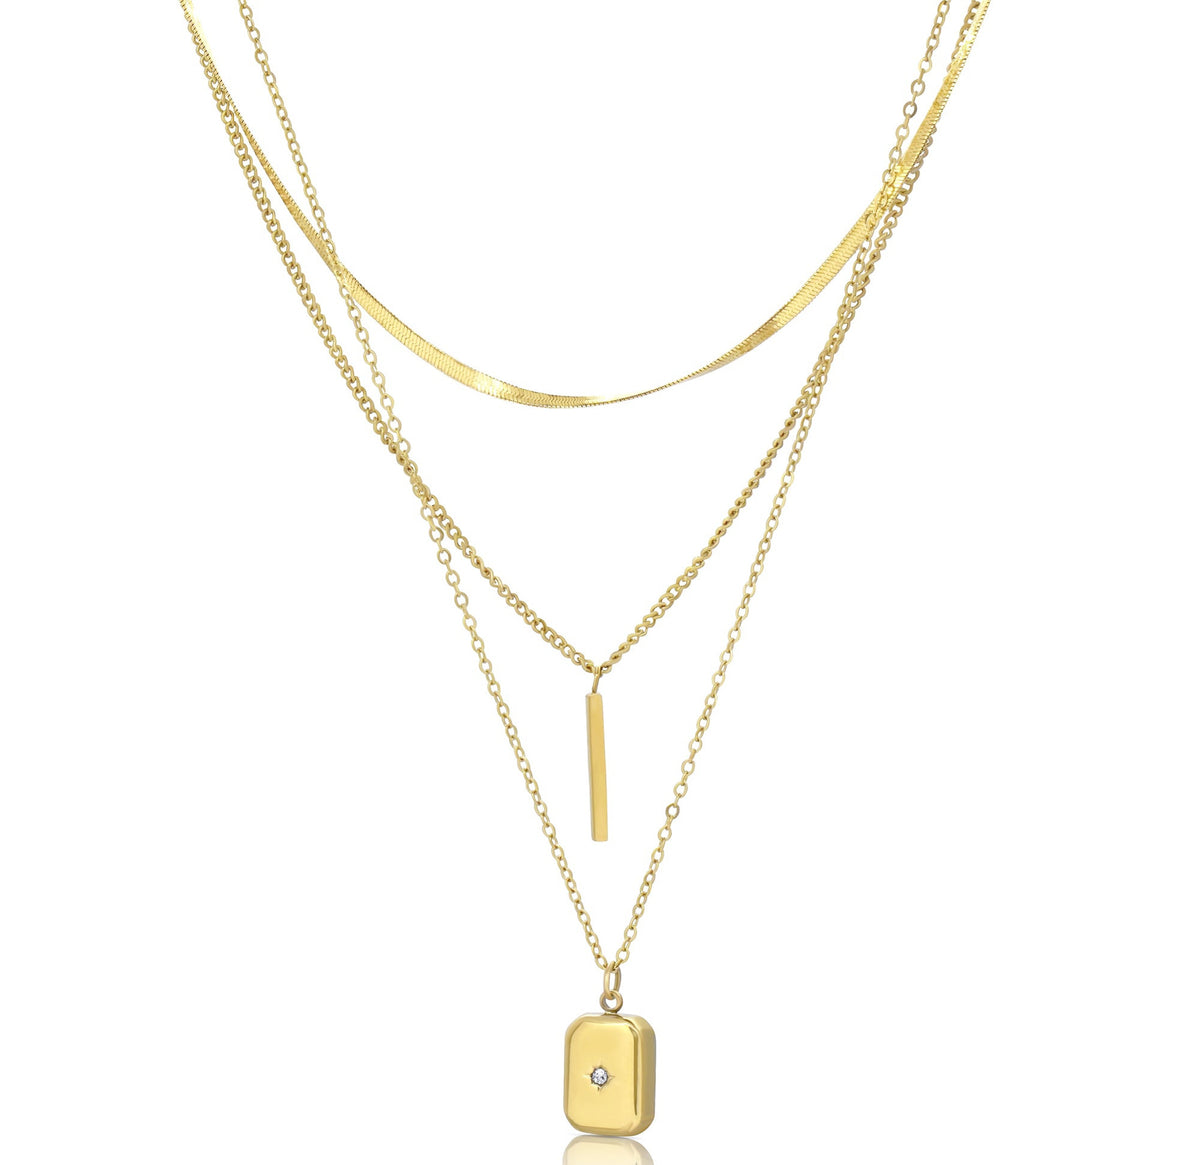 gold layer chain necklace waterproof jewelry